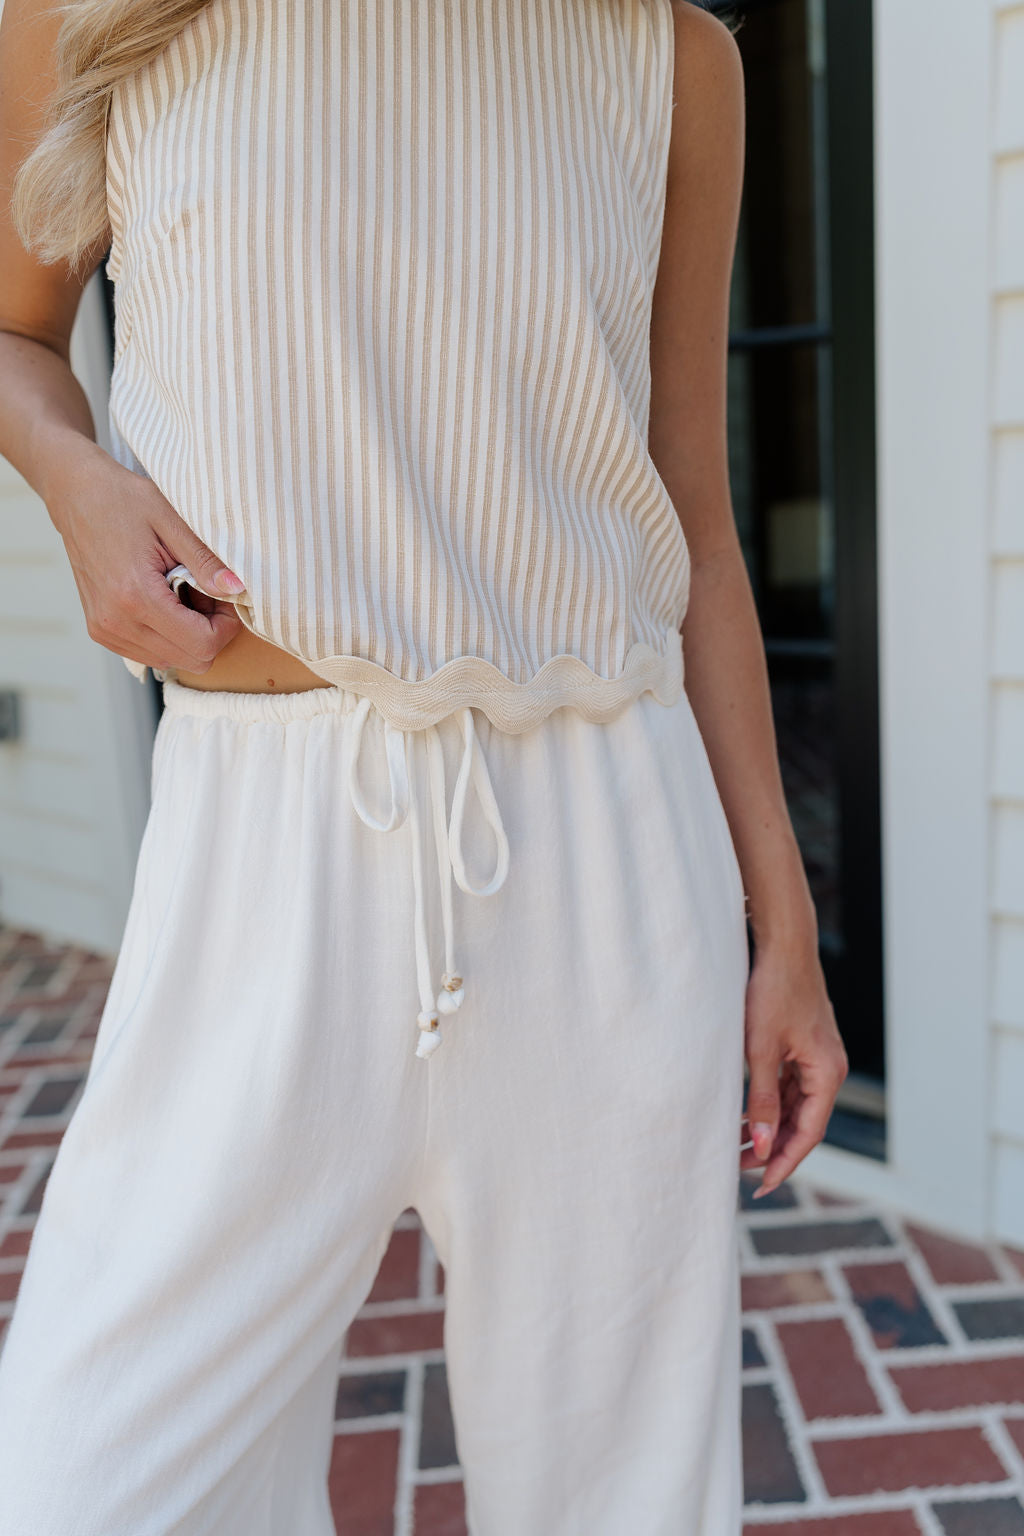 Close up view of female model wearing the Alice Off White Wide Leg Drawstring Pants which features Off White Lightweight Linen Fabric, Off White Lining, Wide Pant Legs, Side Pockets and Elastic Waistband with Drawstring Tie